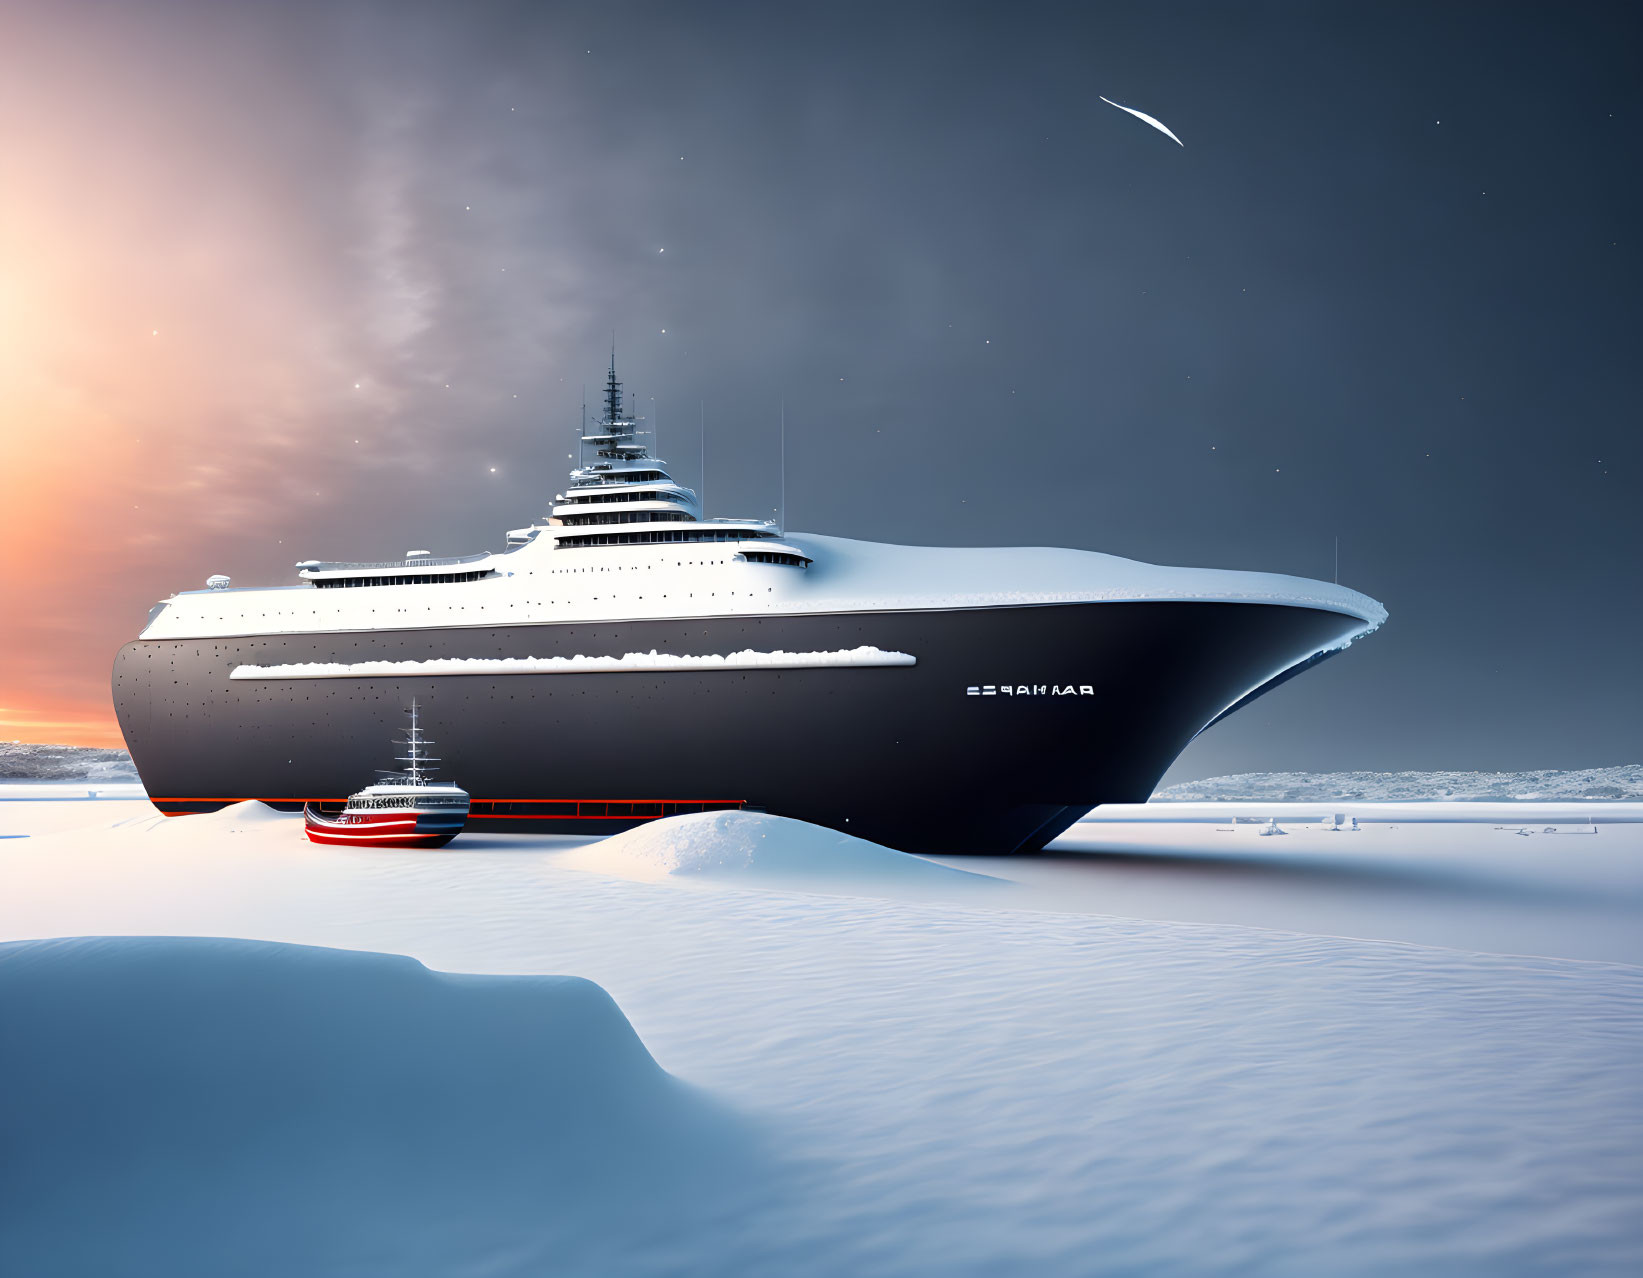 Winter boat space ship